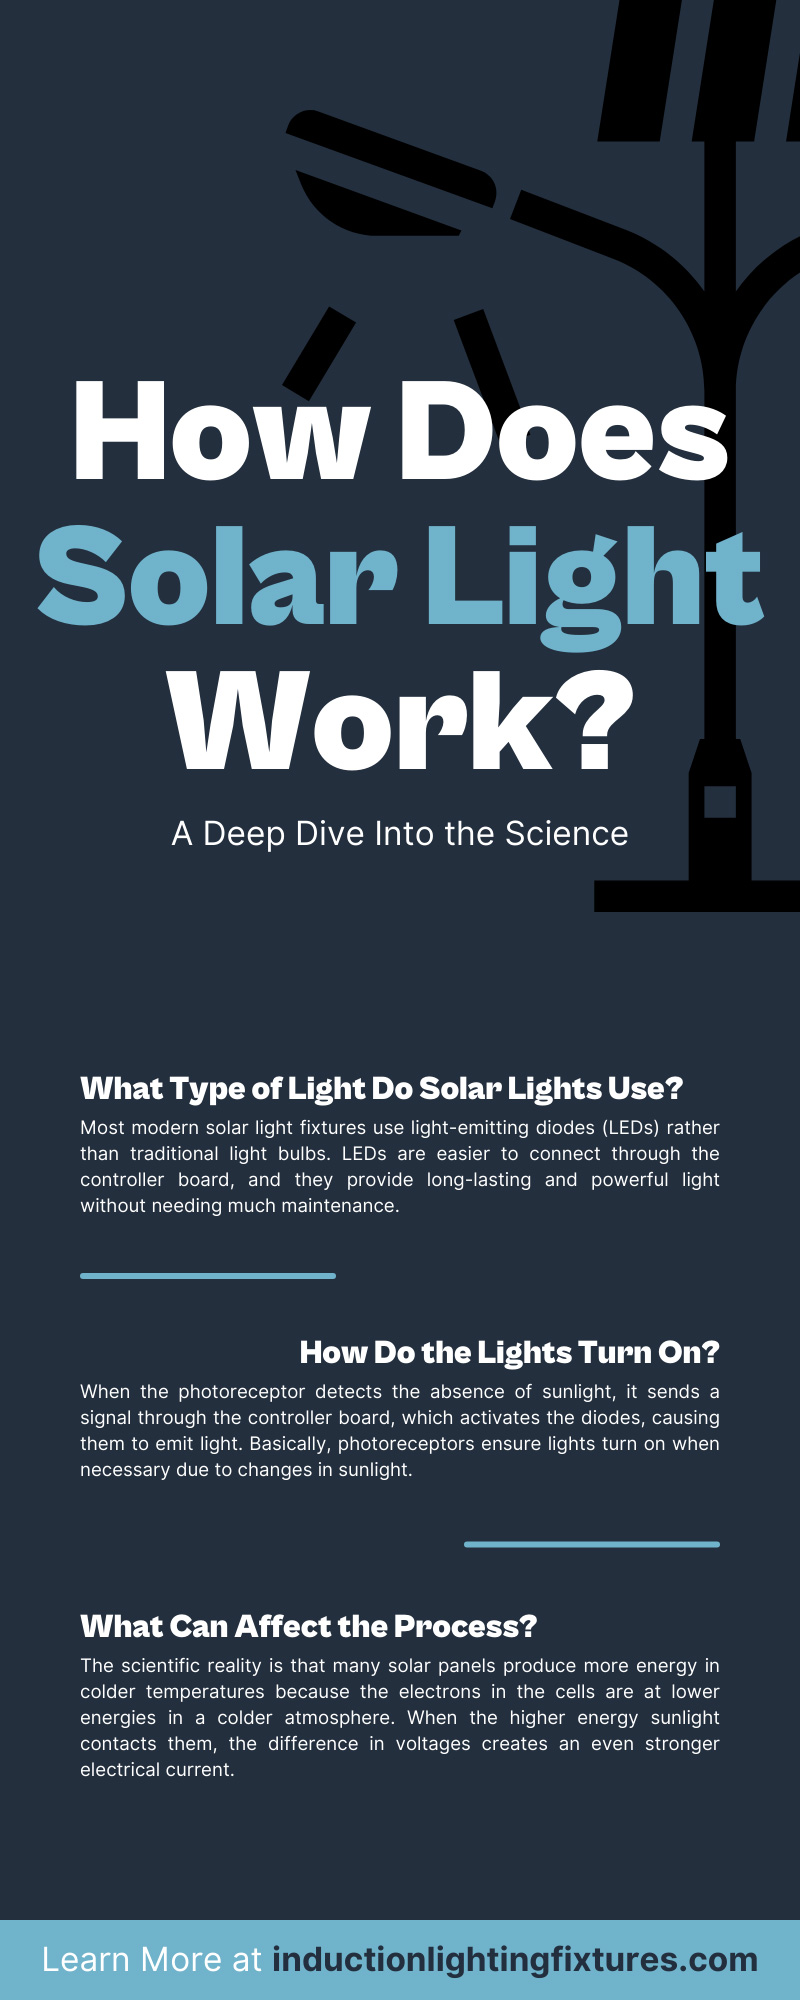 How Does Solar Light Work? A Deep Dive Into the Science